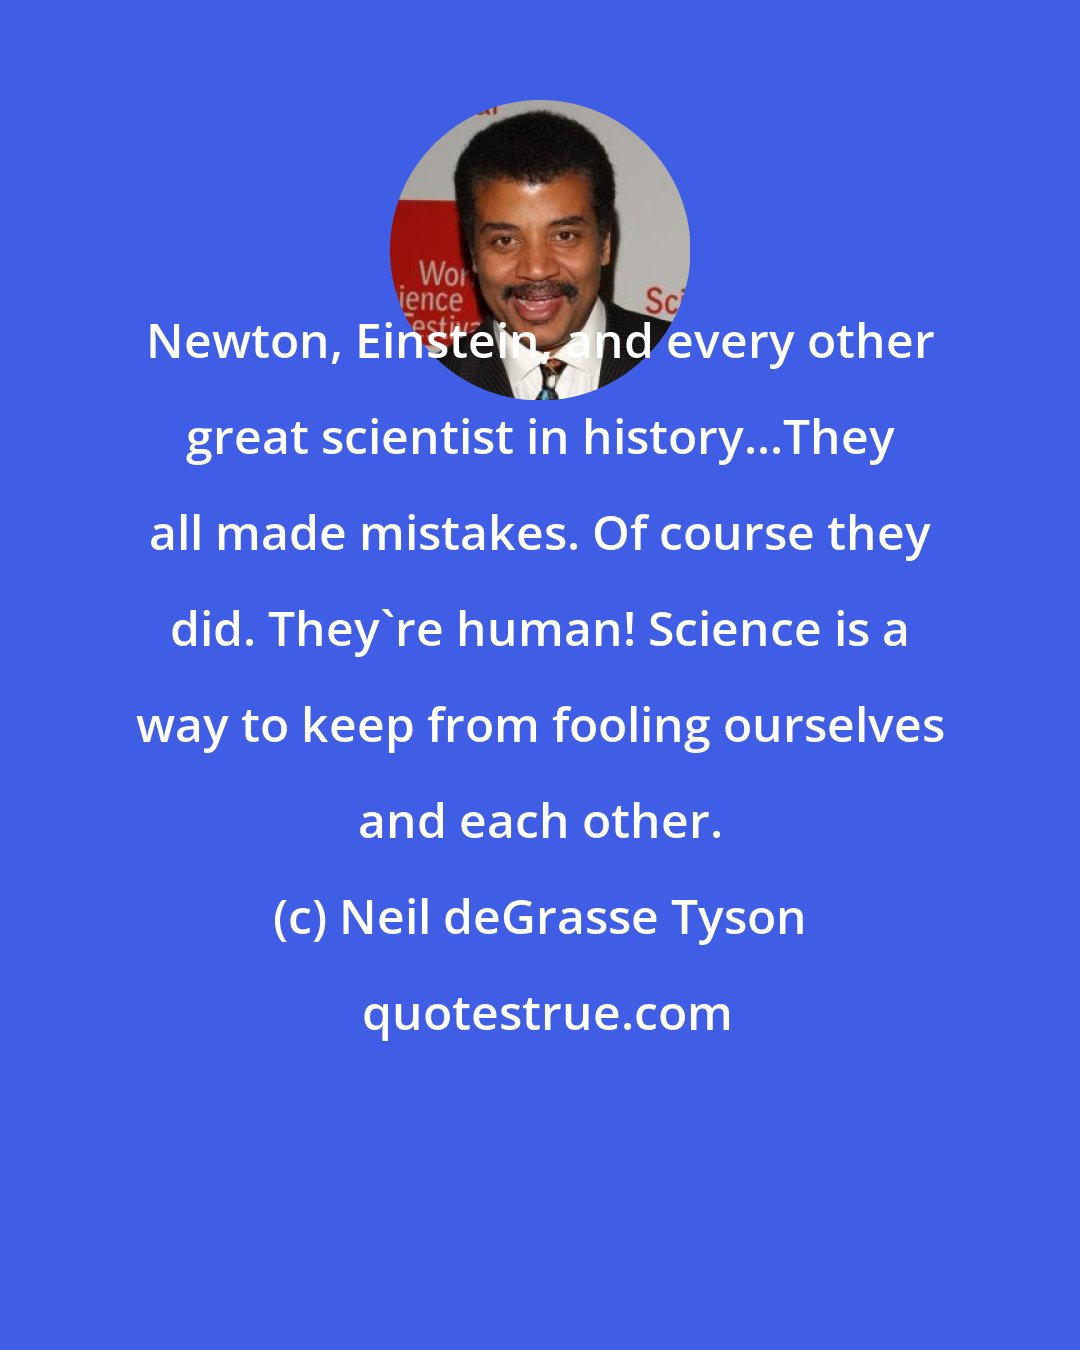 Neil deGrasse Tyson: Newton, Einstein, and every other great scientist in history...They all made mistakes. Of course they did. They're human! Science is a way to keep from fooling ourselves and each other.